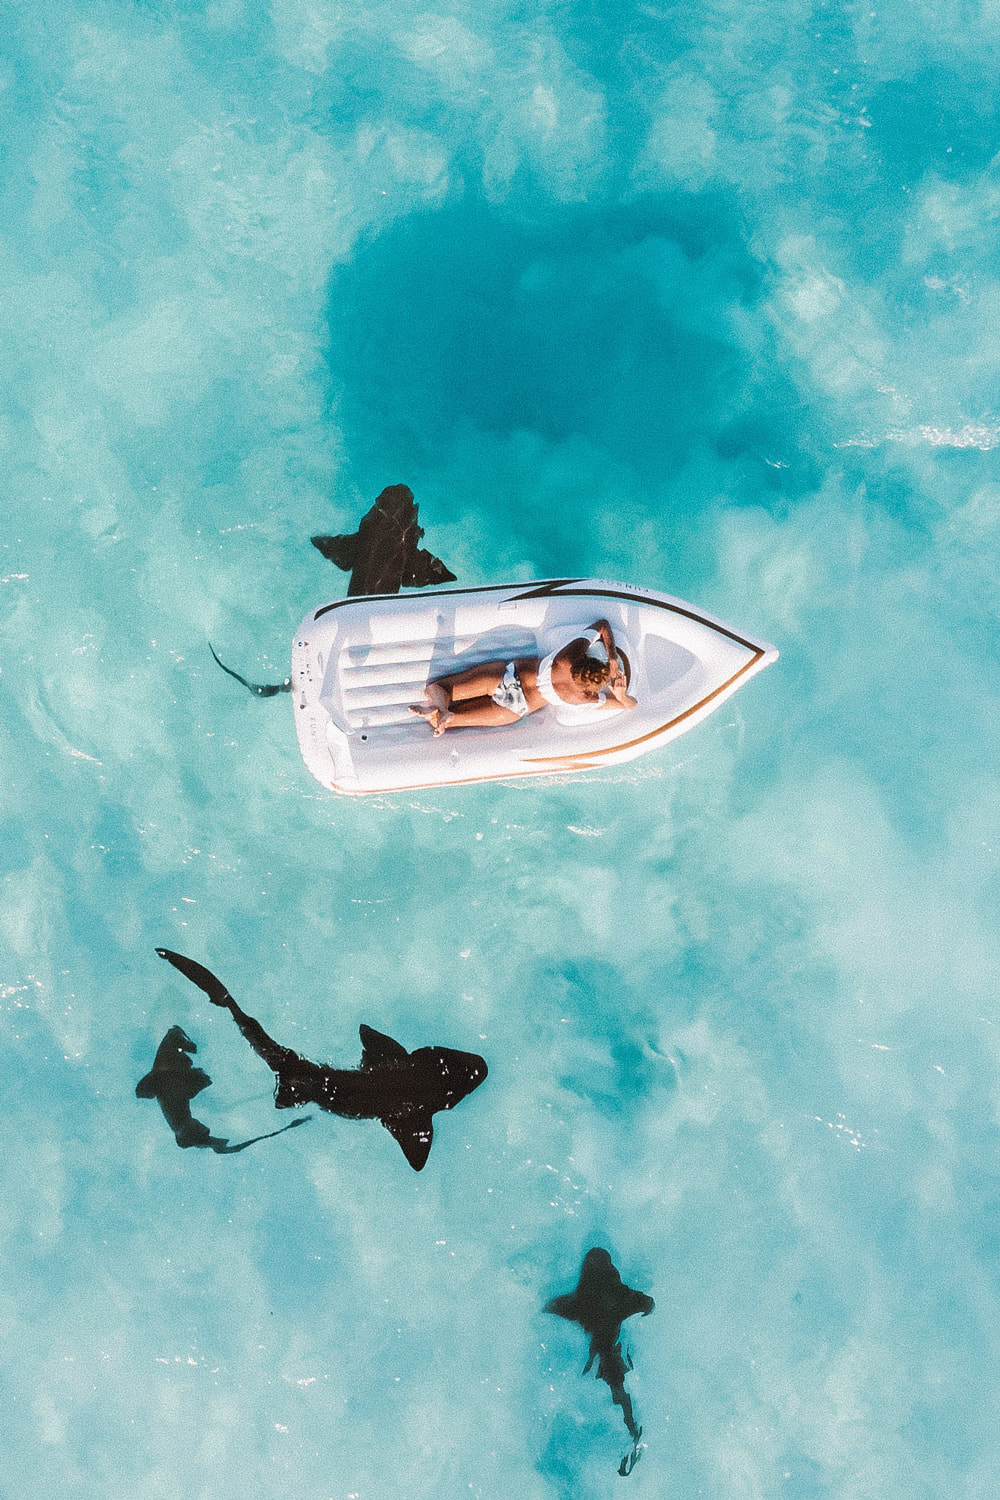 The Things You MUST Add To Your Bucket List. Swimming with Sharks.